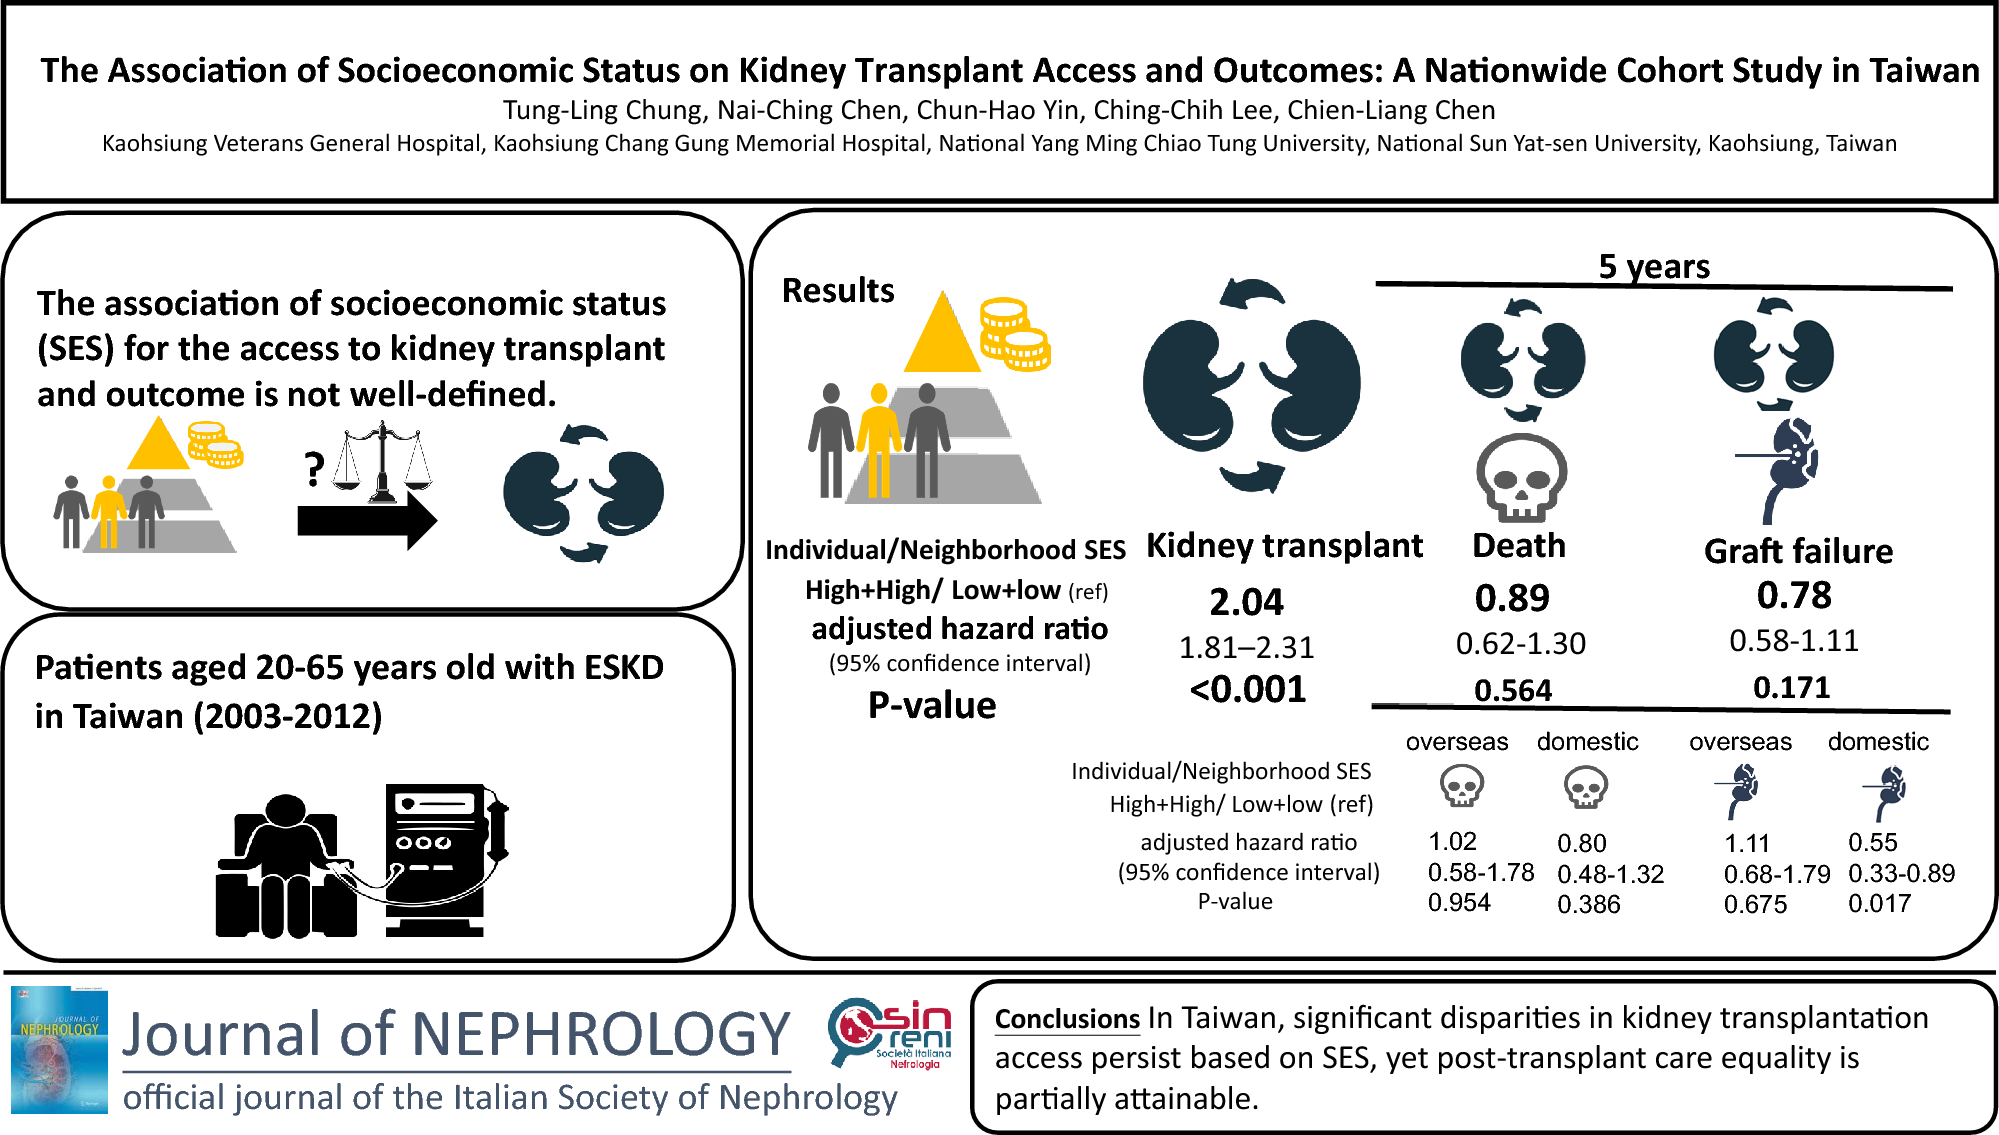 The association of socioeconomic status on kidney transplant access and outcomes: a nationwide cohort study in Taiwan